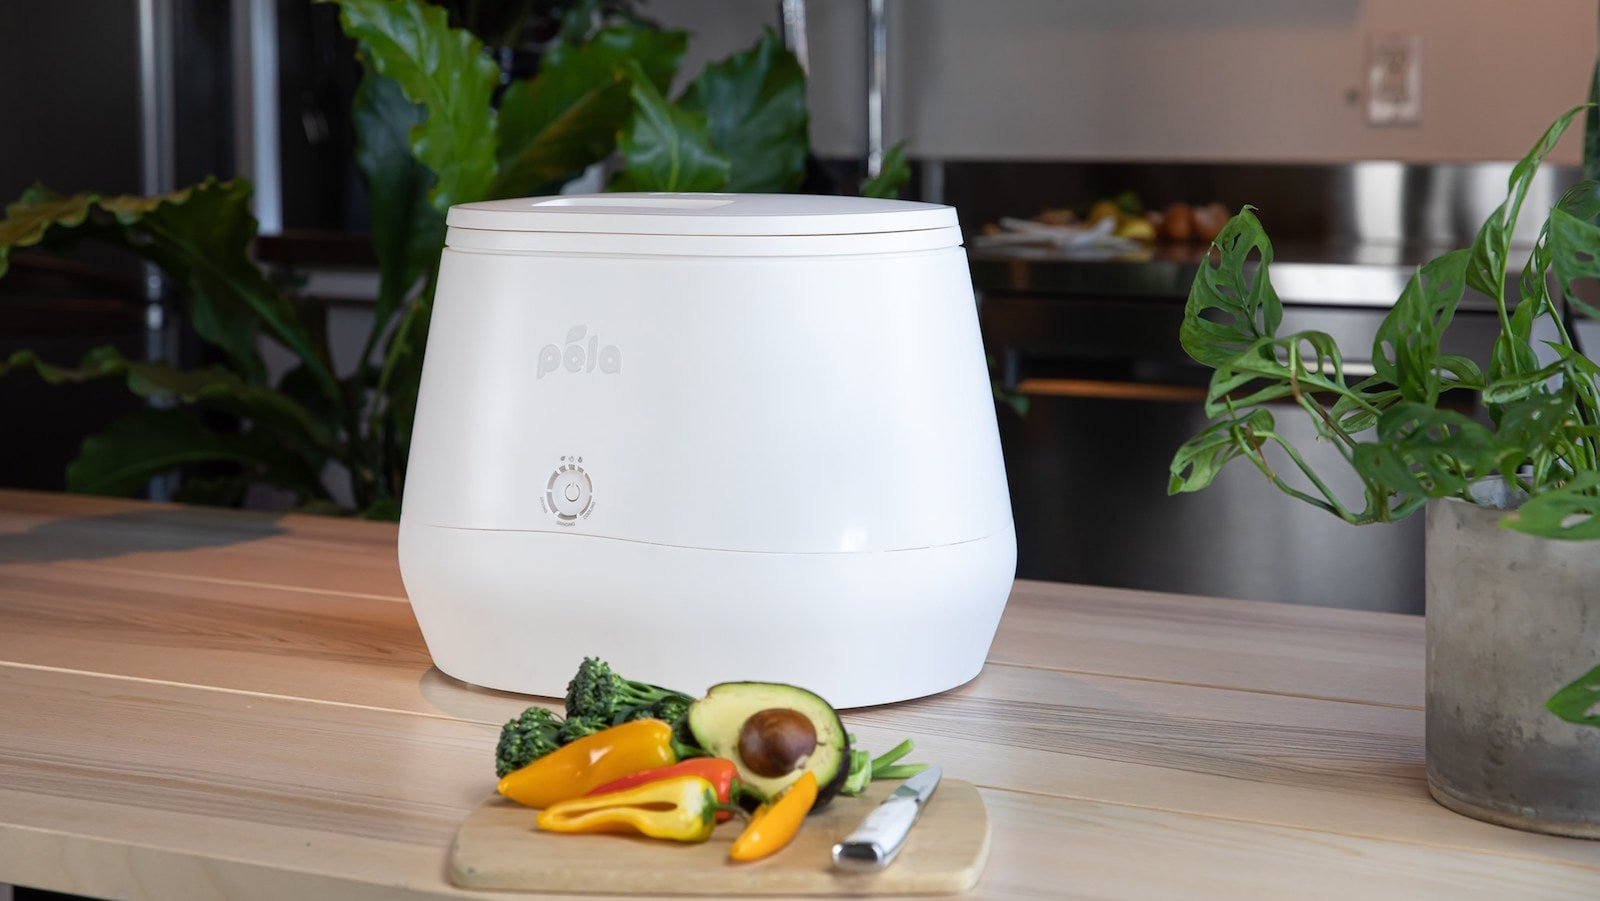 Pela Lomi kitchen composter turns food scraps into healthy compost to reduce your waste